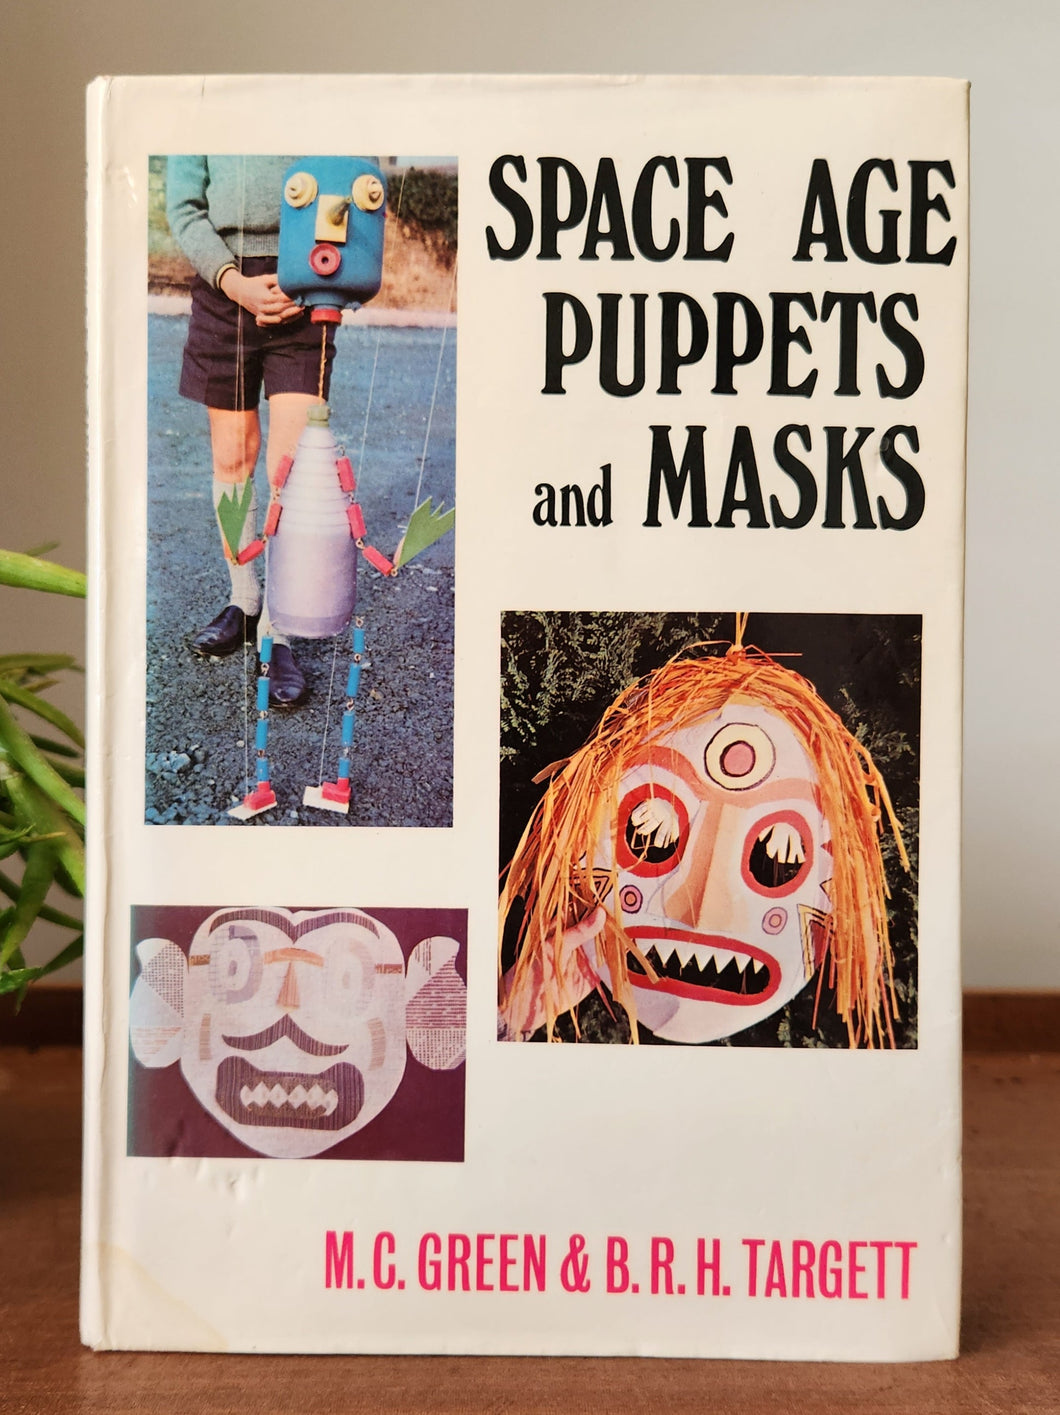 Space Age Puppets and Masks by M.C. Green, B.R.H. Targett